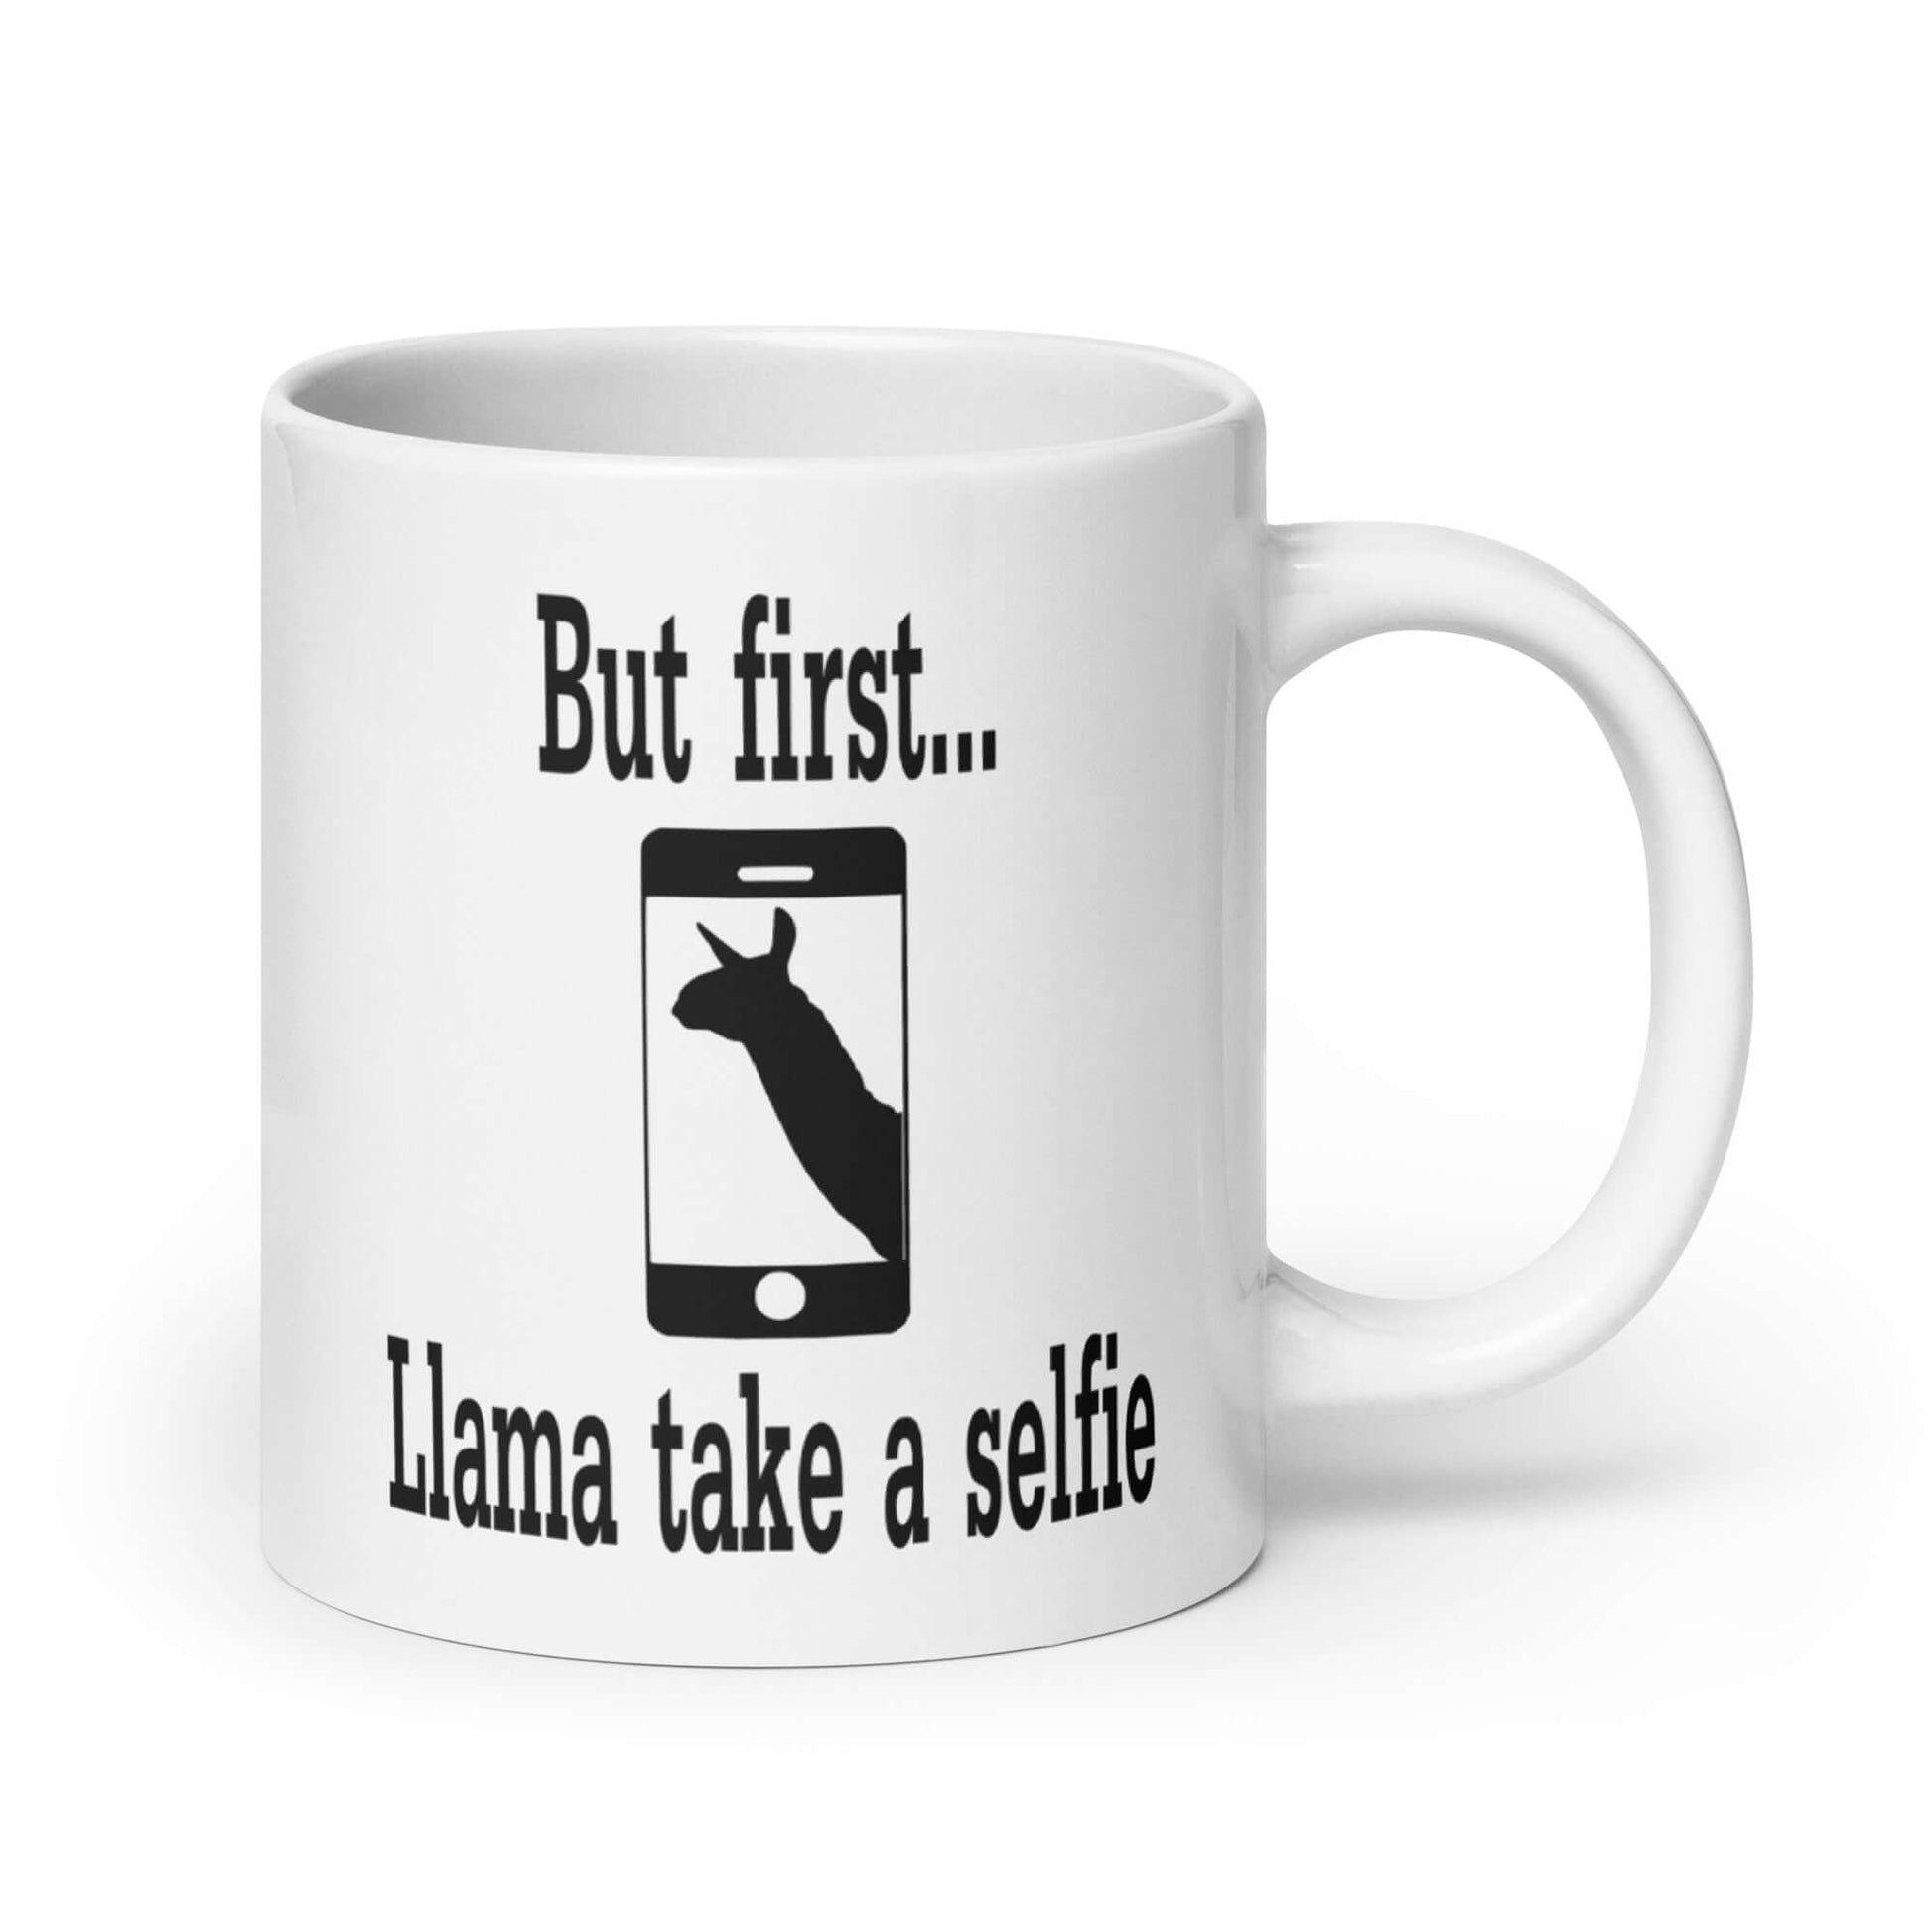 White ceramic coffee mug with image of an outline of a cell phone with image of a llama on the screen. The words But first...llama take a selfie are around the image. The graphic is printed on both sides of the mug,